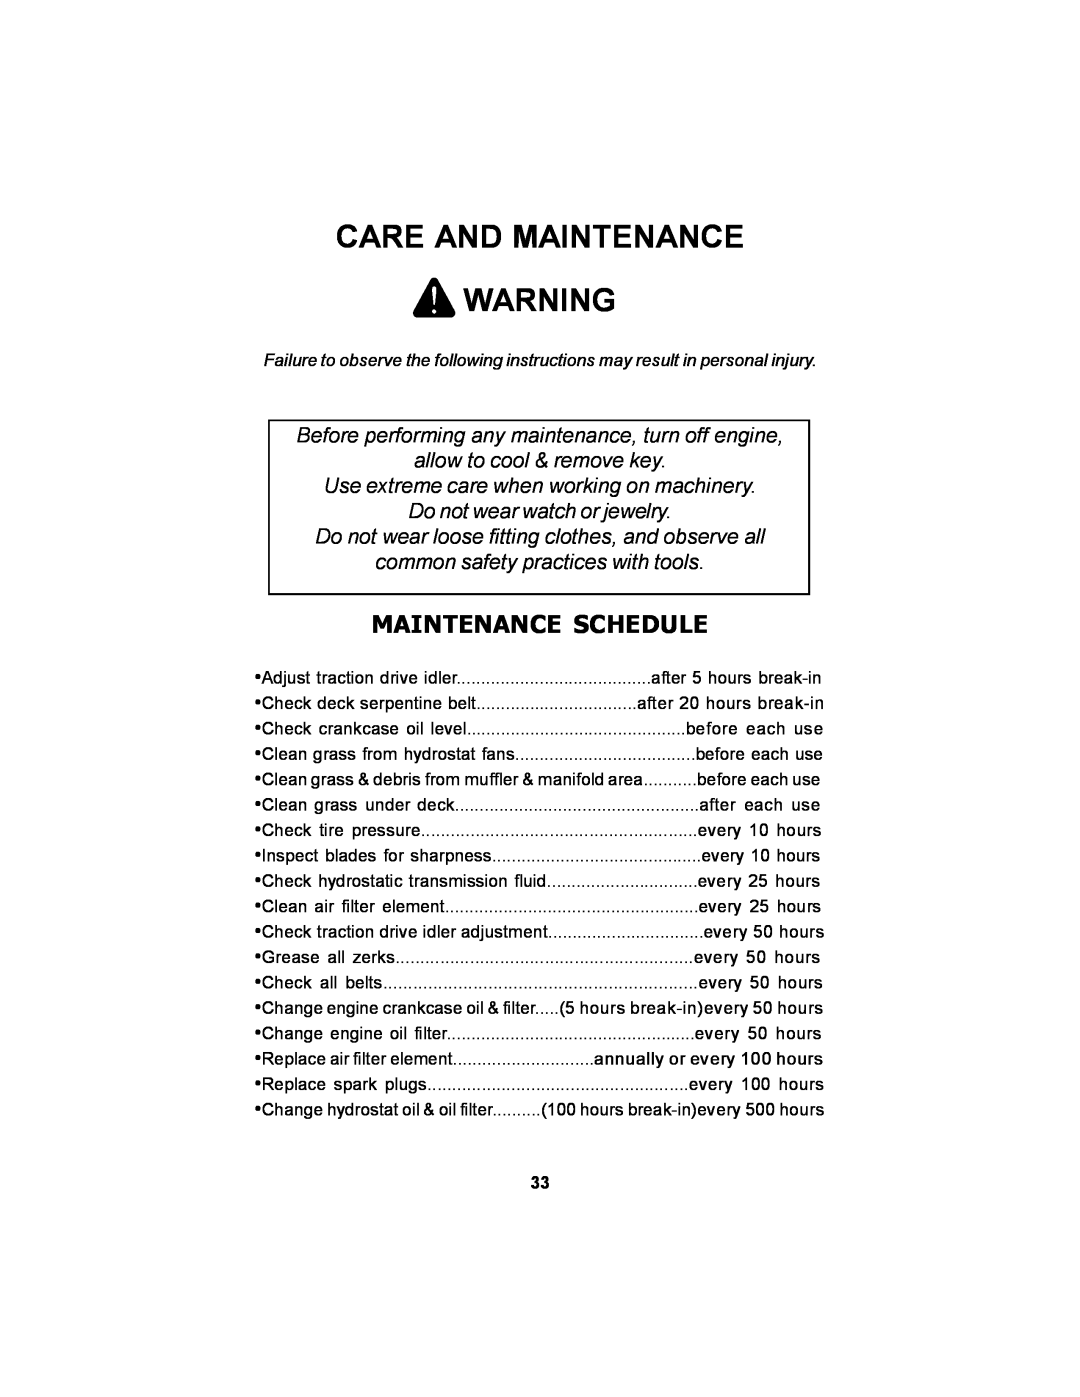 Dixon ELS 60 manual Care And Maintenance, Maintenance Schedule, Before performing any maintenance, turn off engine 